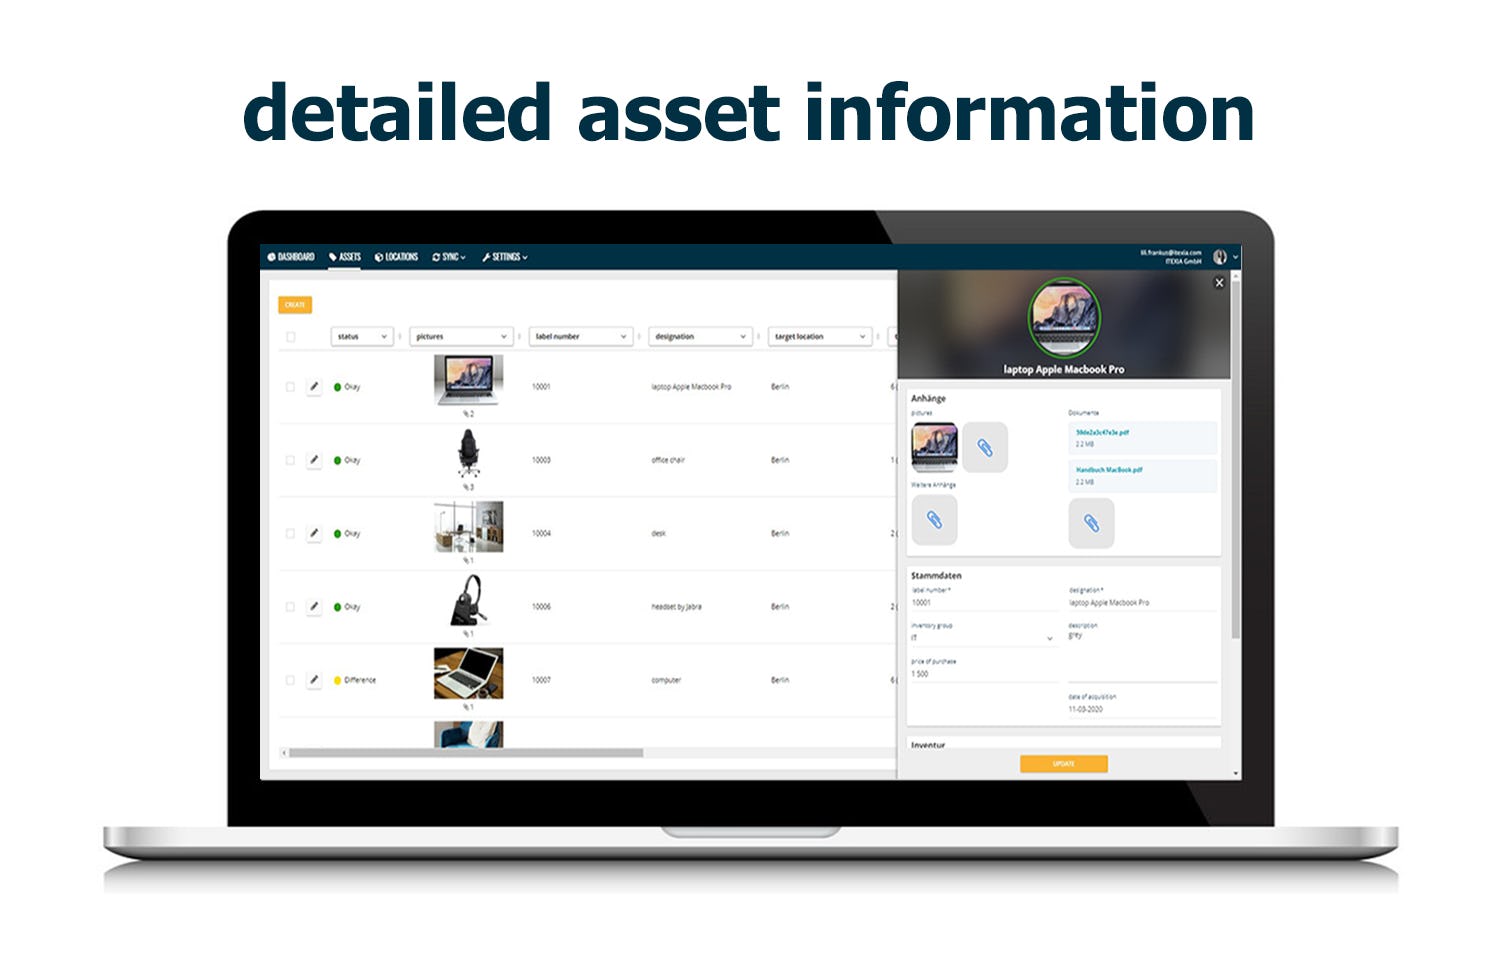 ITEXIA Software - get every information and history of assets in the detailed view